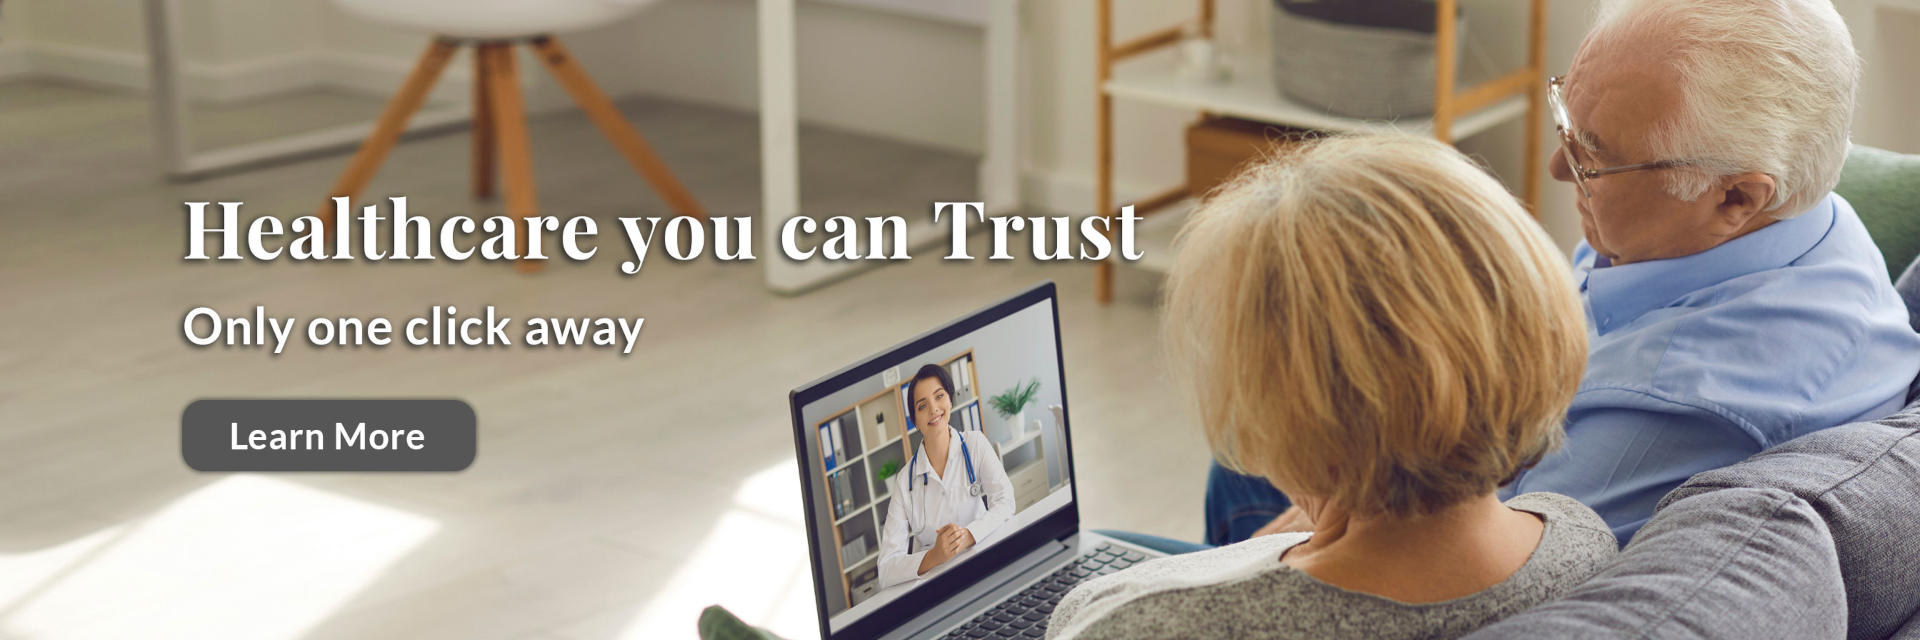 Picture of Two People and a heading that says Healthcare you can Trust
Only one click away
(Learn More)